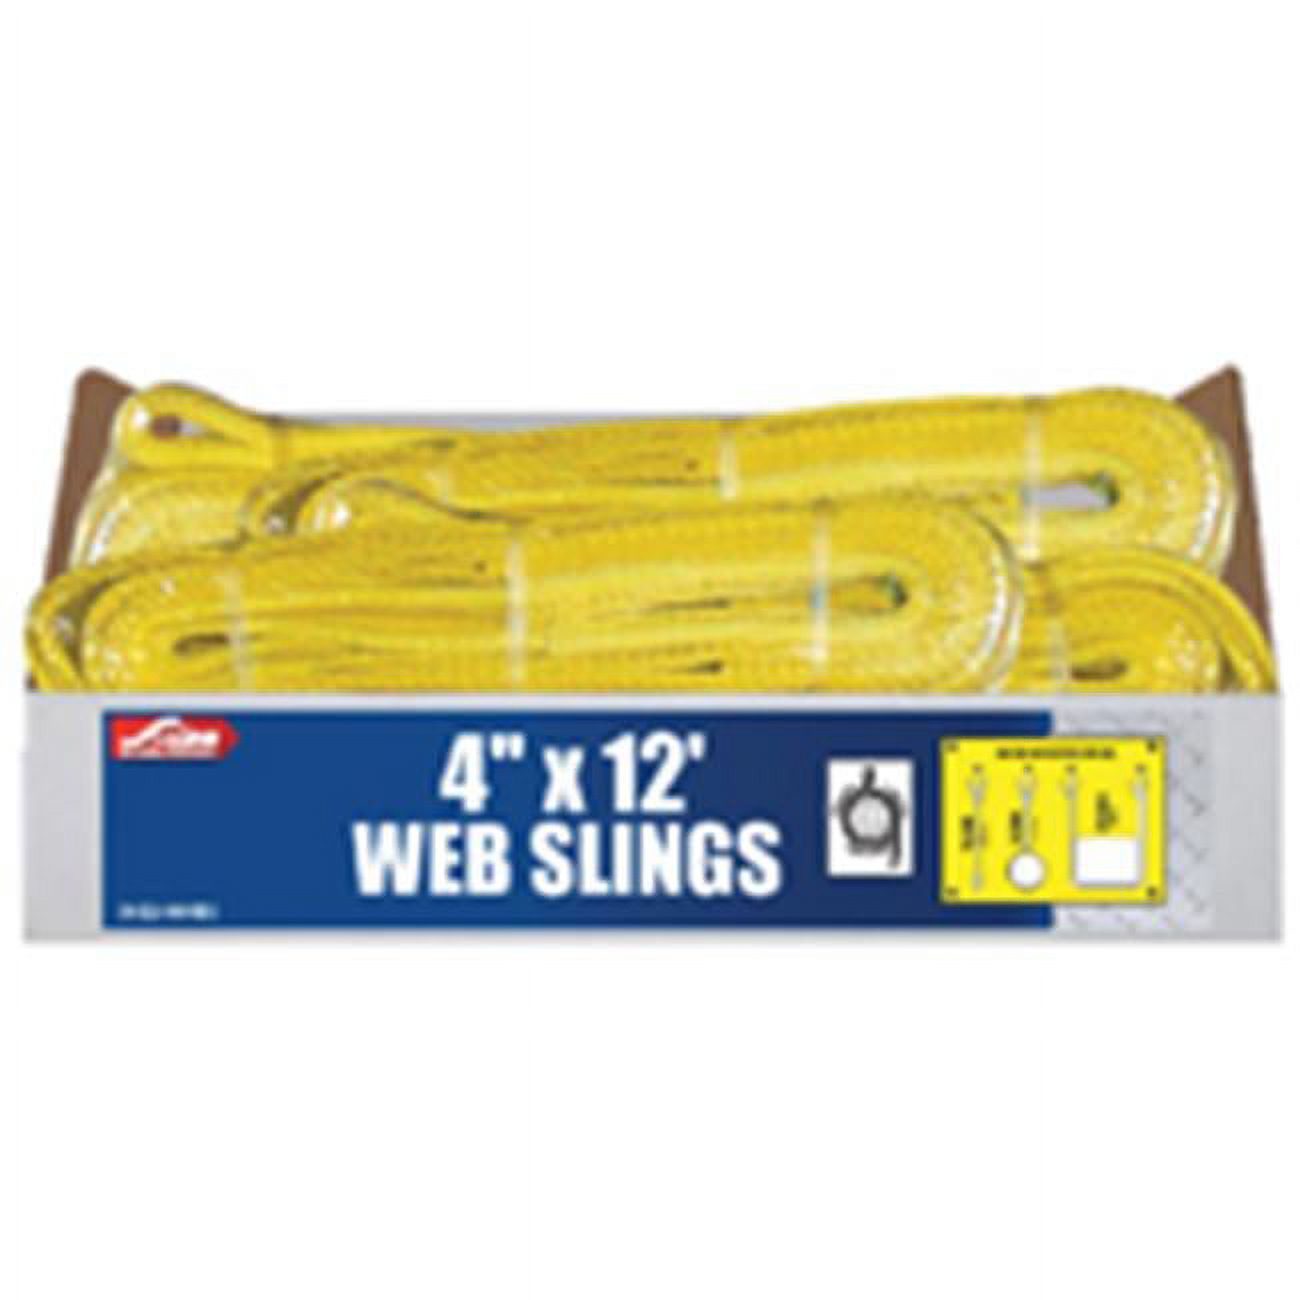 S-Line 20-EE2-9804X12 Eye to Eye Twisted Web Lifting Sling, 4 in W x 12 ft L, 2-Ply, Loop End - image 1 of 2